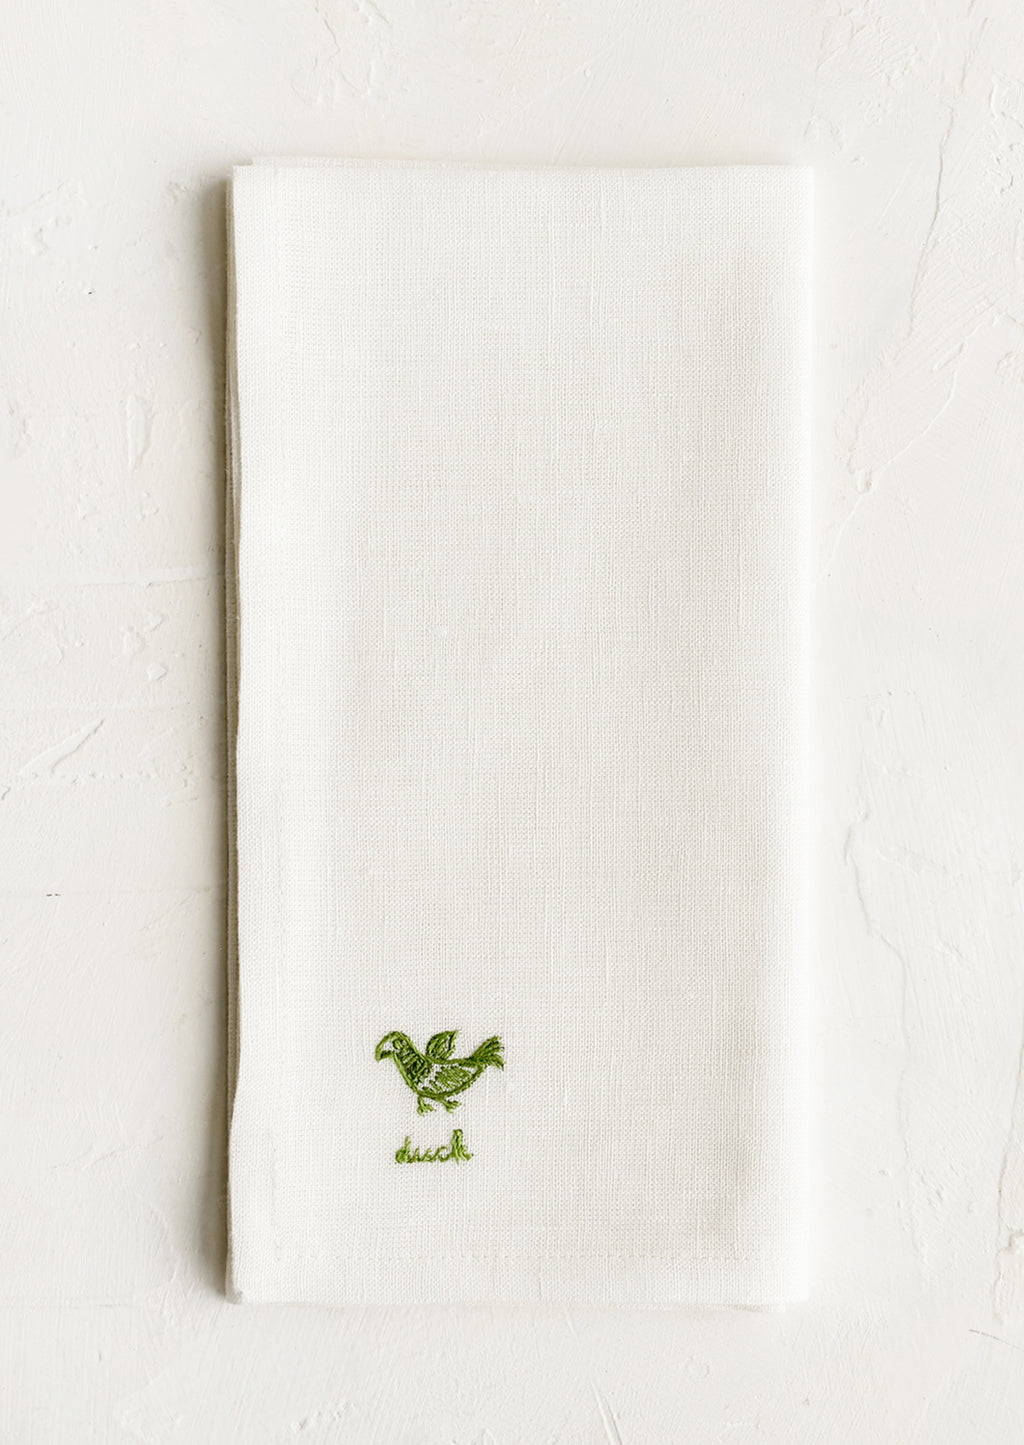 2: An ecru linen napkin with green embroidered duck and "duck" text embroidered in green at corner.